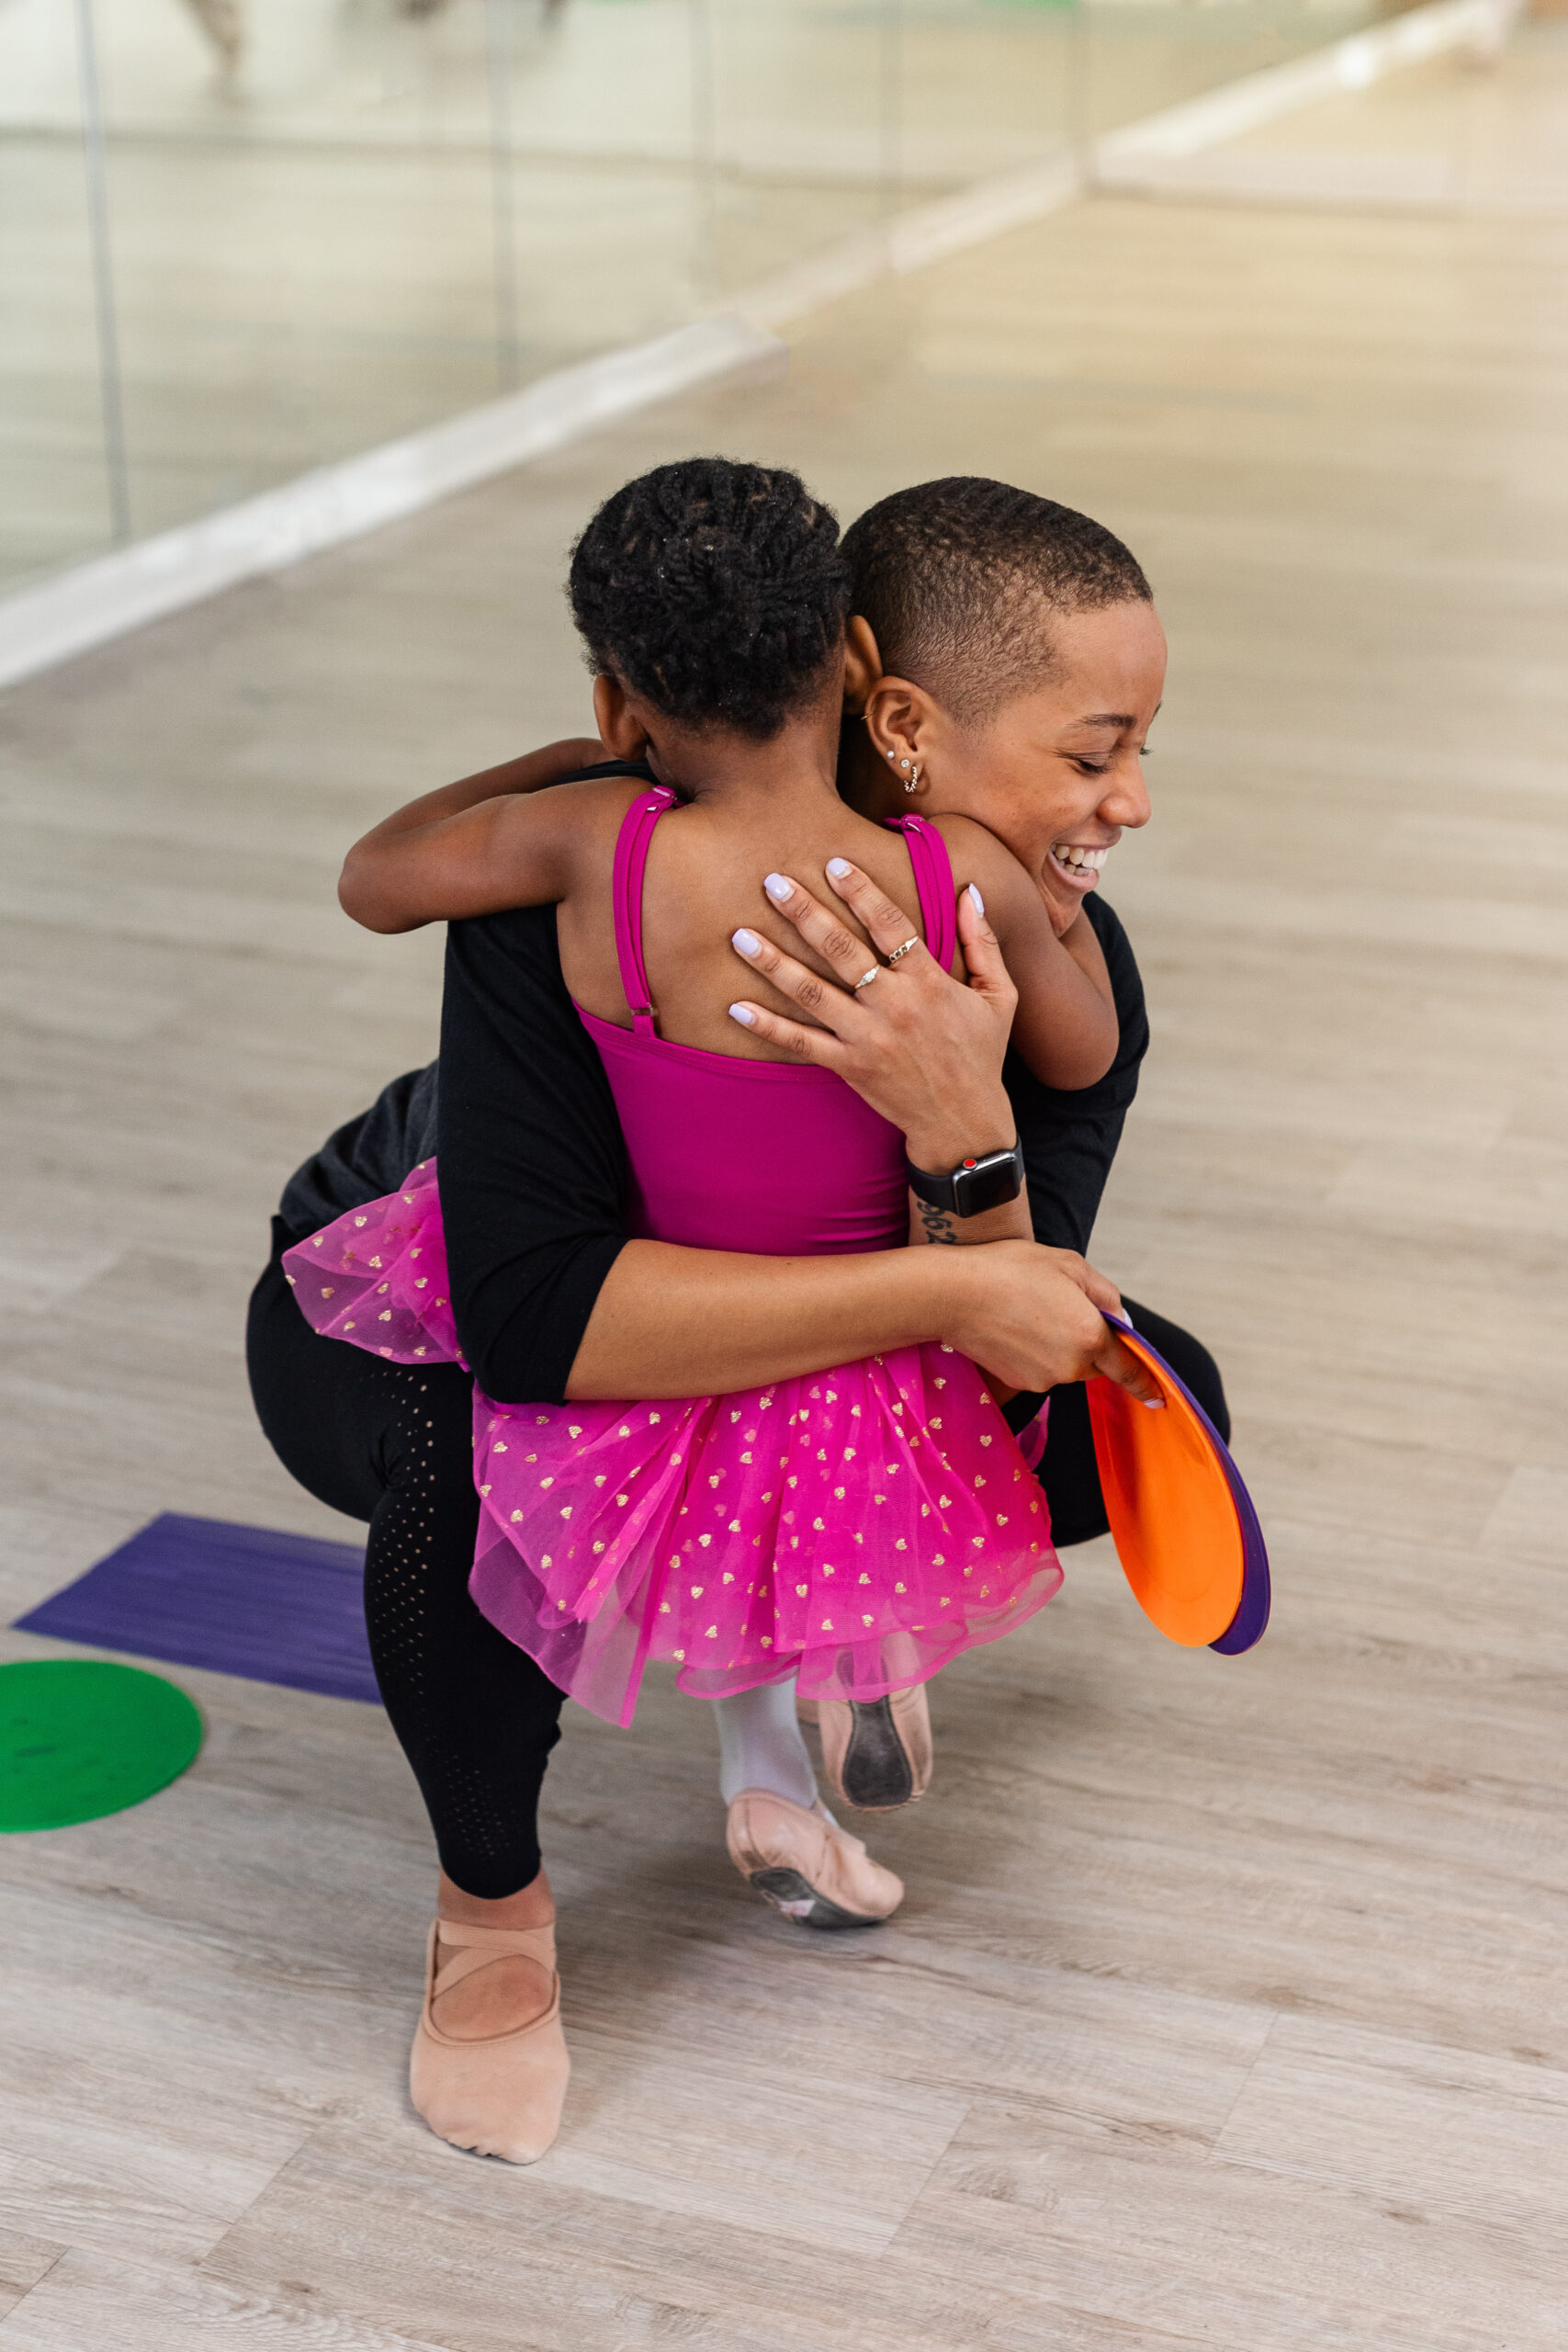 Ms Joie receives a grateful hug from a young ballet student